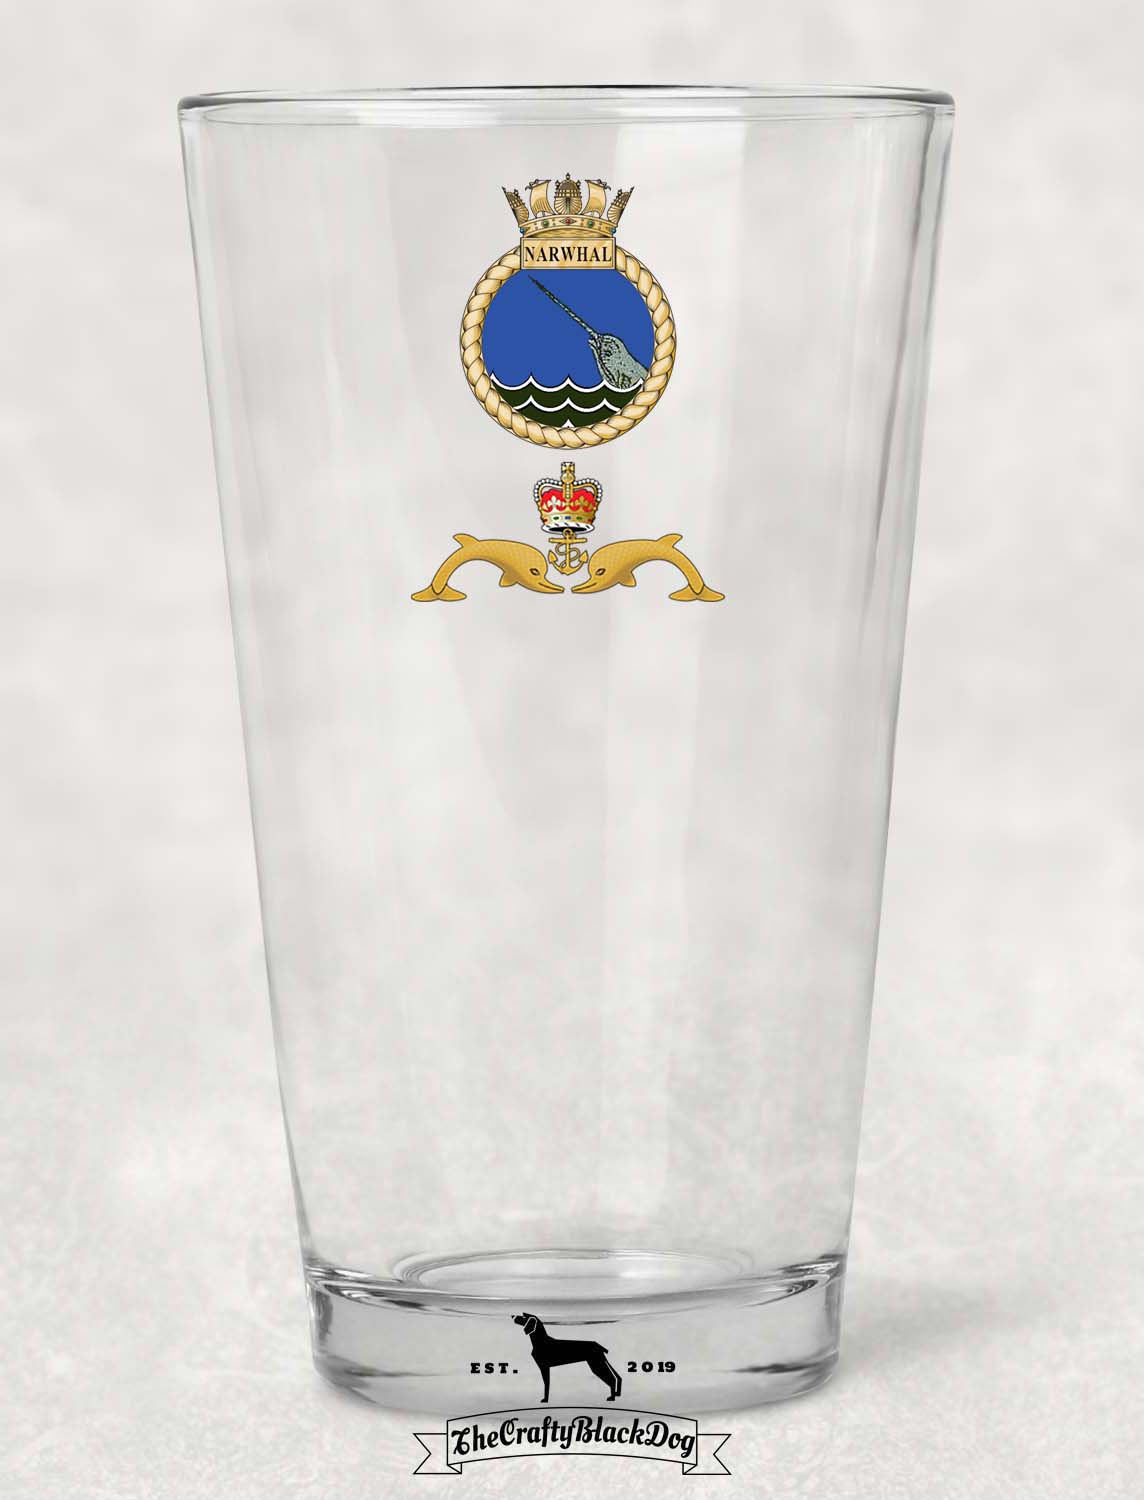 HMS Narwhal - Pint Glass